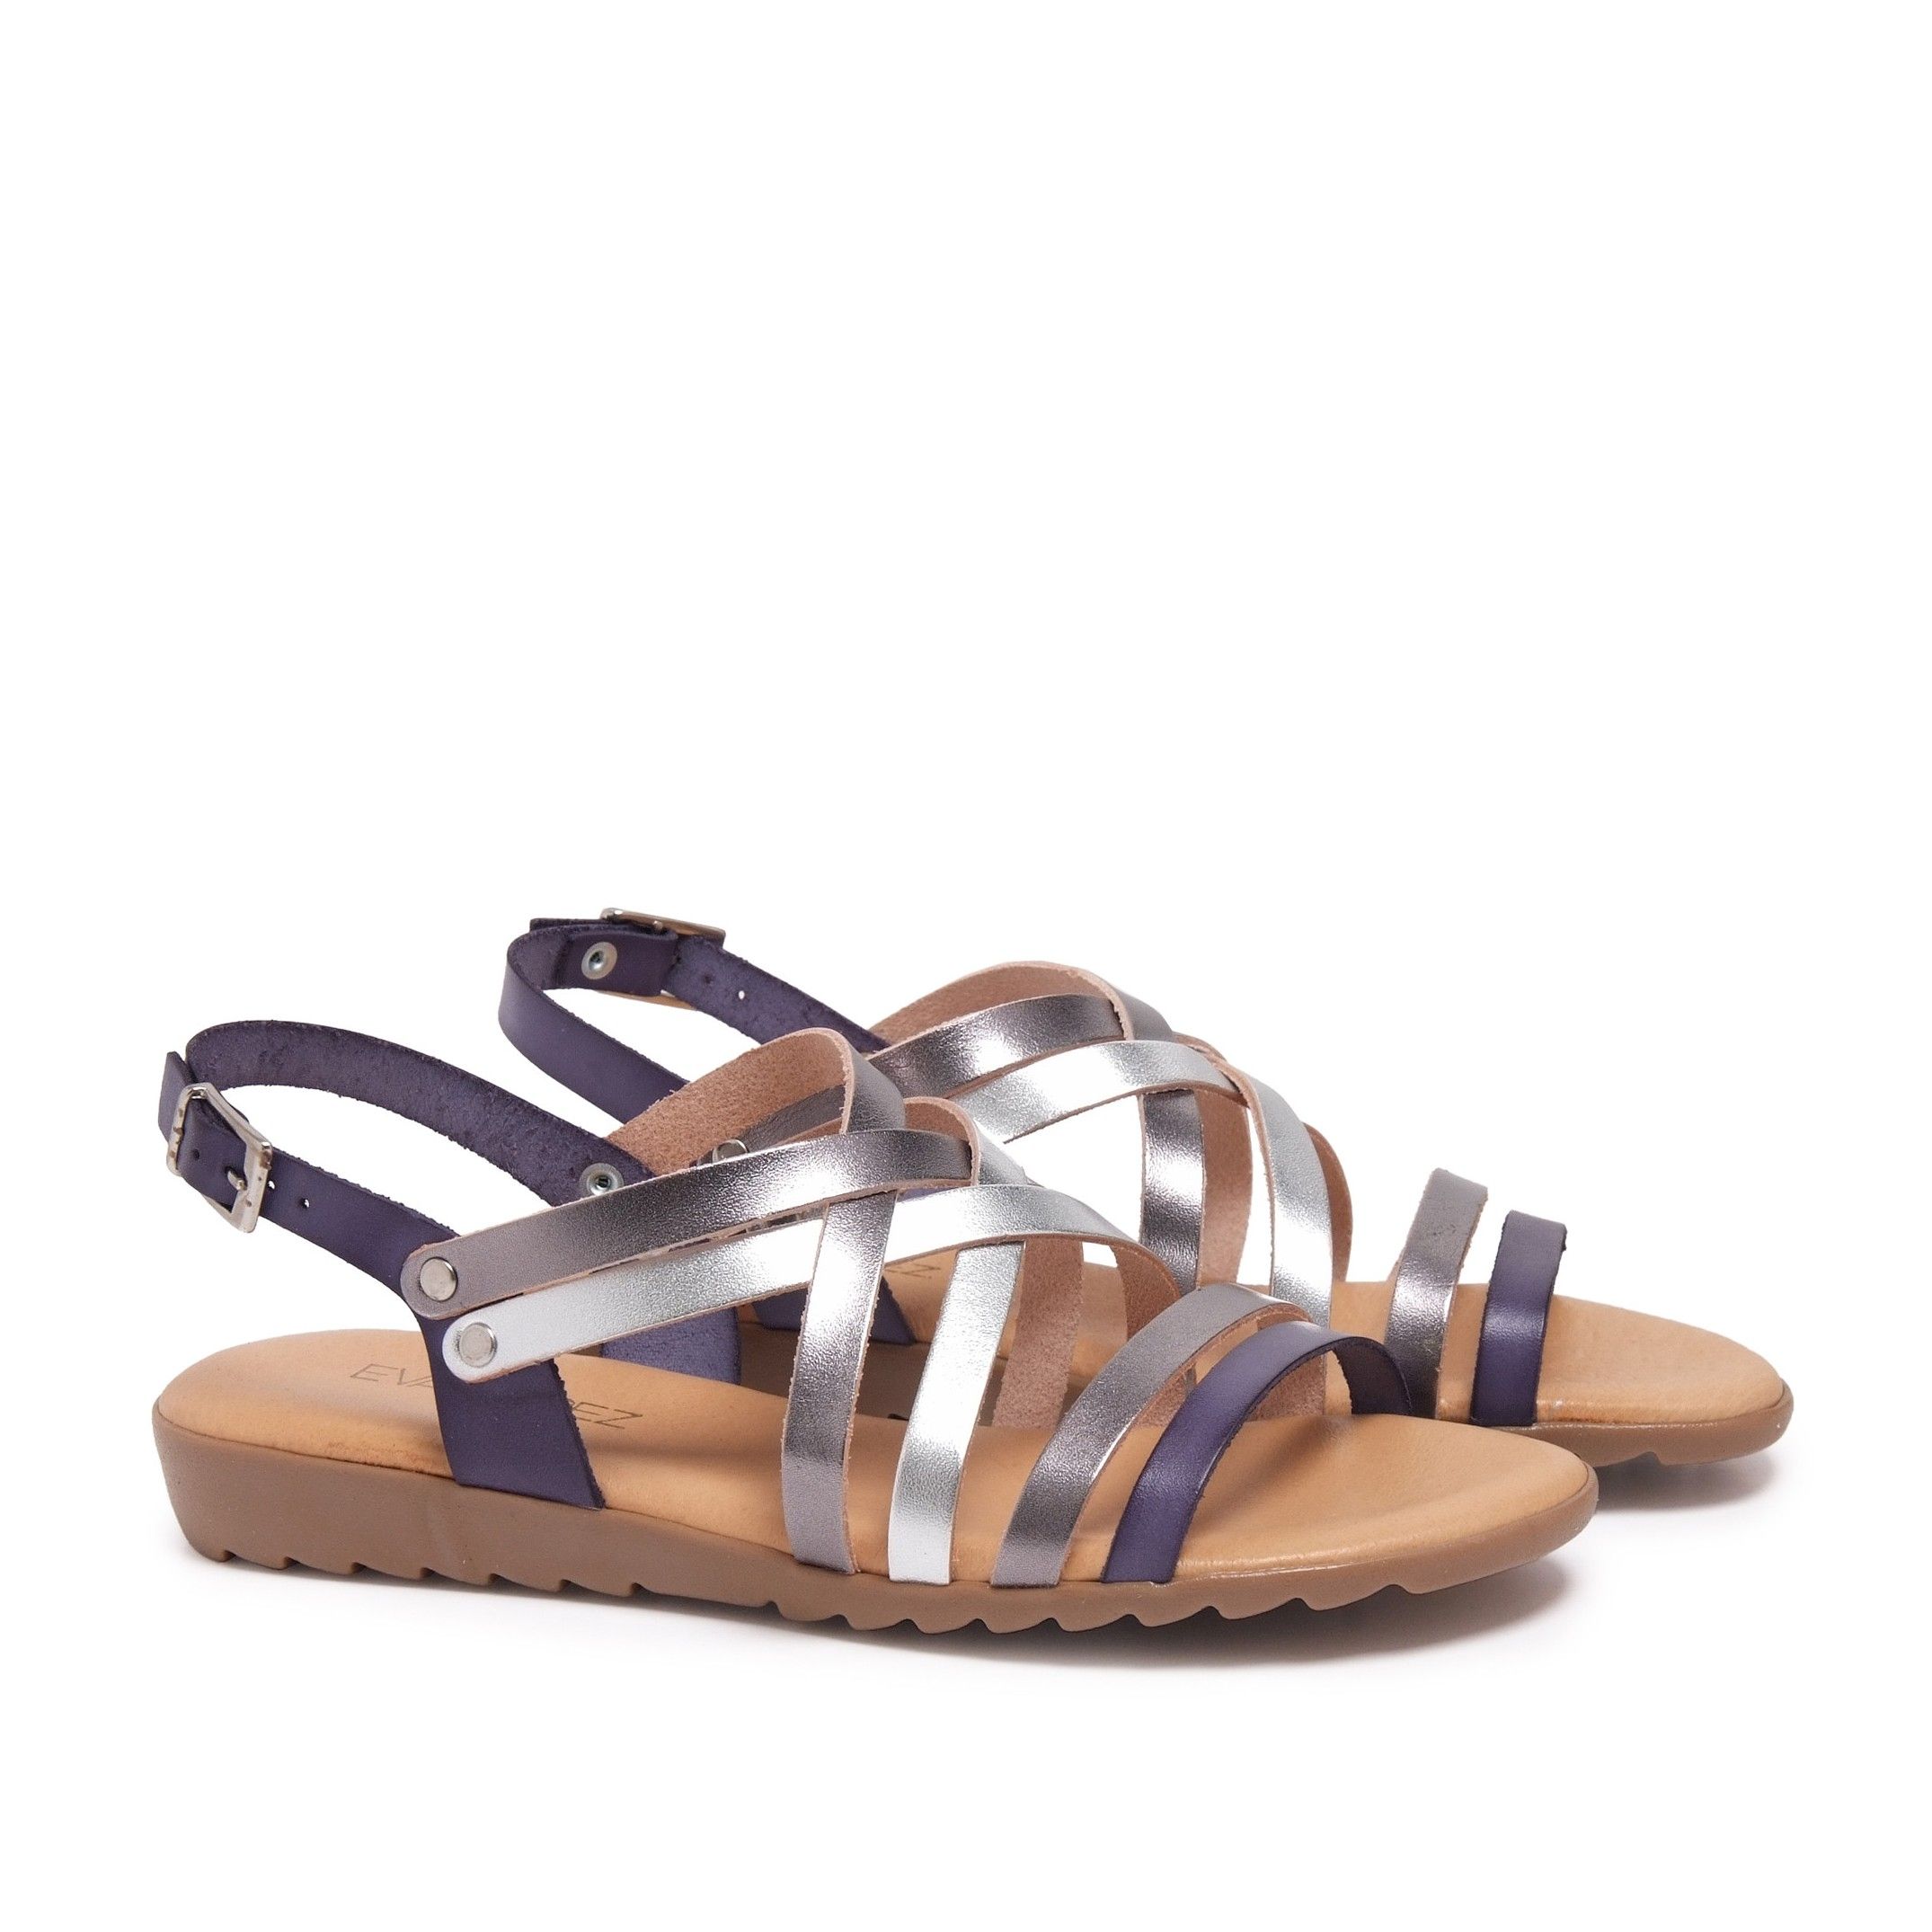 Flat leather sandal with four crossed strips and 2 strips in front. Closure: metal buckle. Upper, inner an insole : leather. Sole: Non-skid TR caramel color. MADE IN SPAIN.